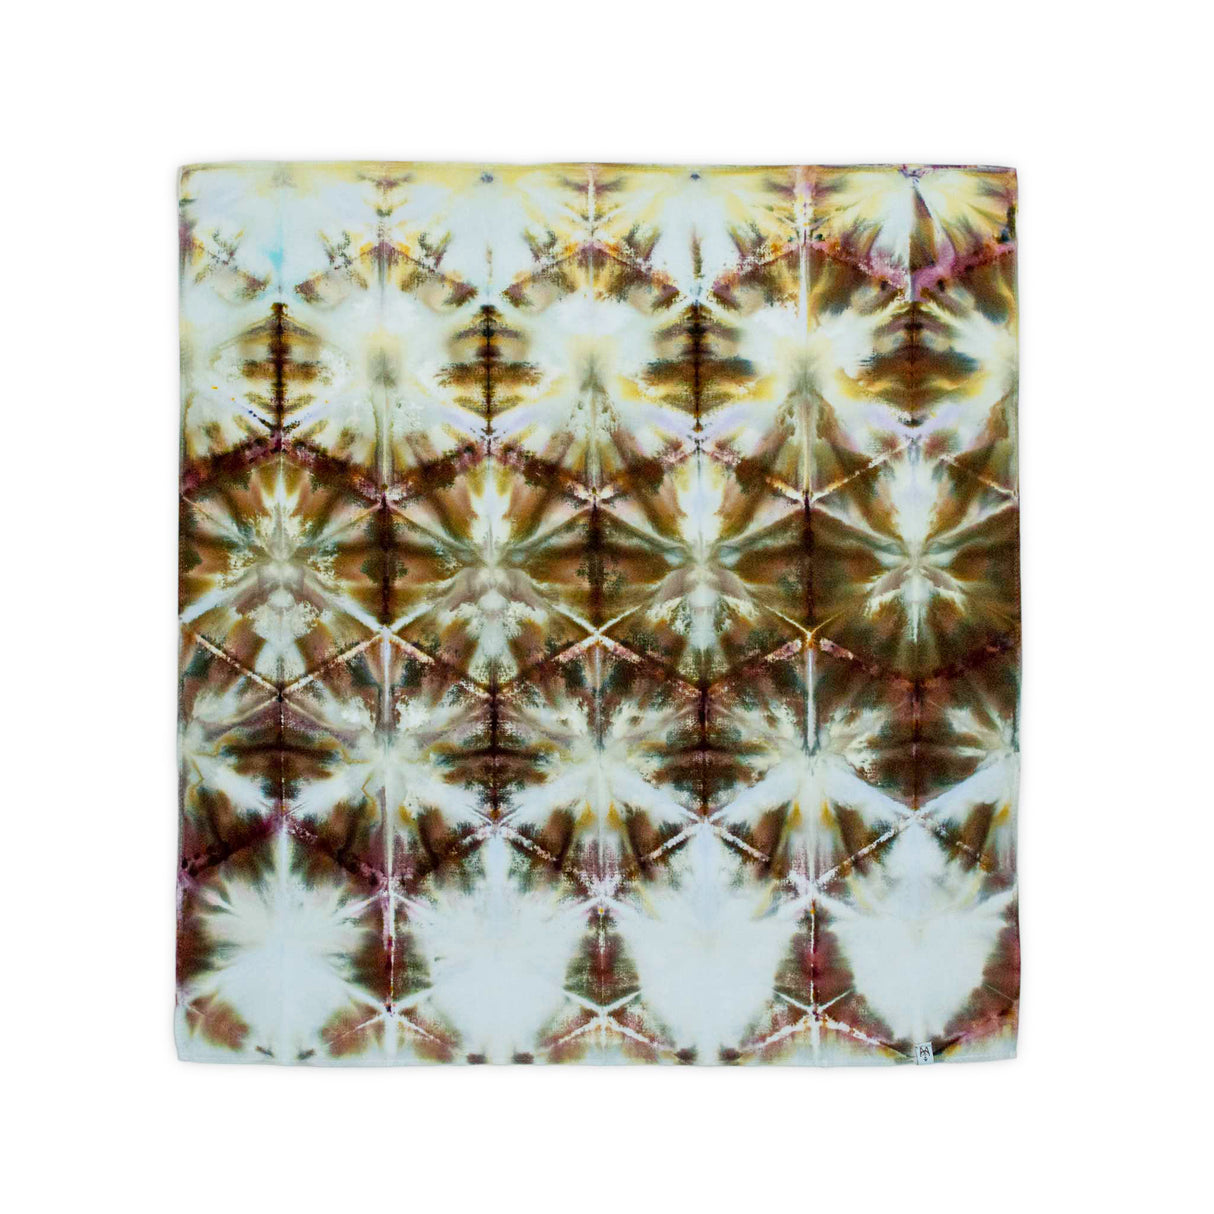 An ice-dyed bandana with a traditional itajime pattern, where each quadrant mirrors the other, in a rustic palette of sepia tones against a white background.